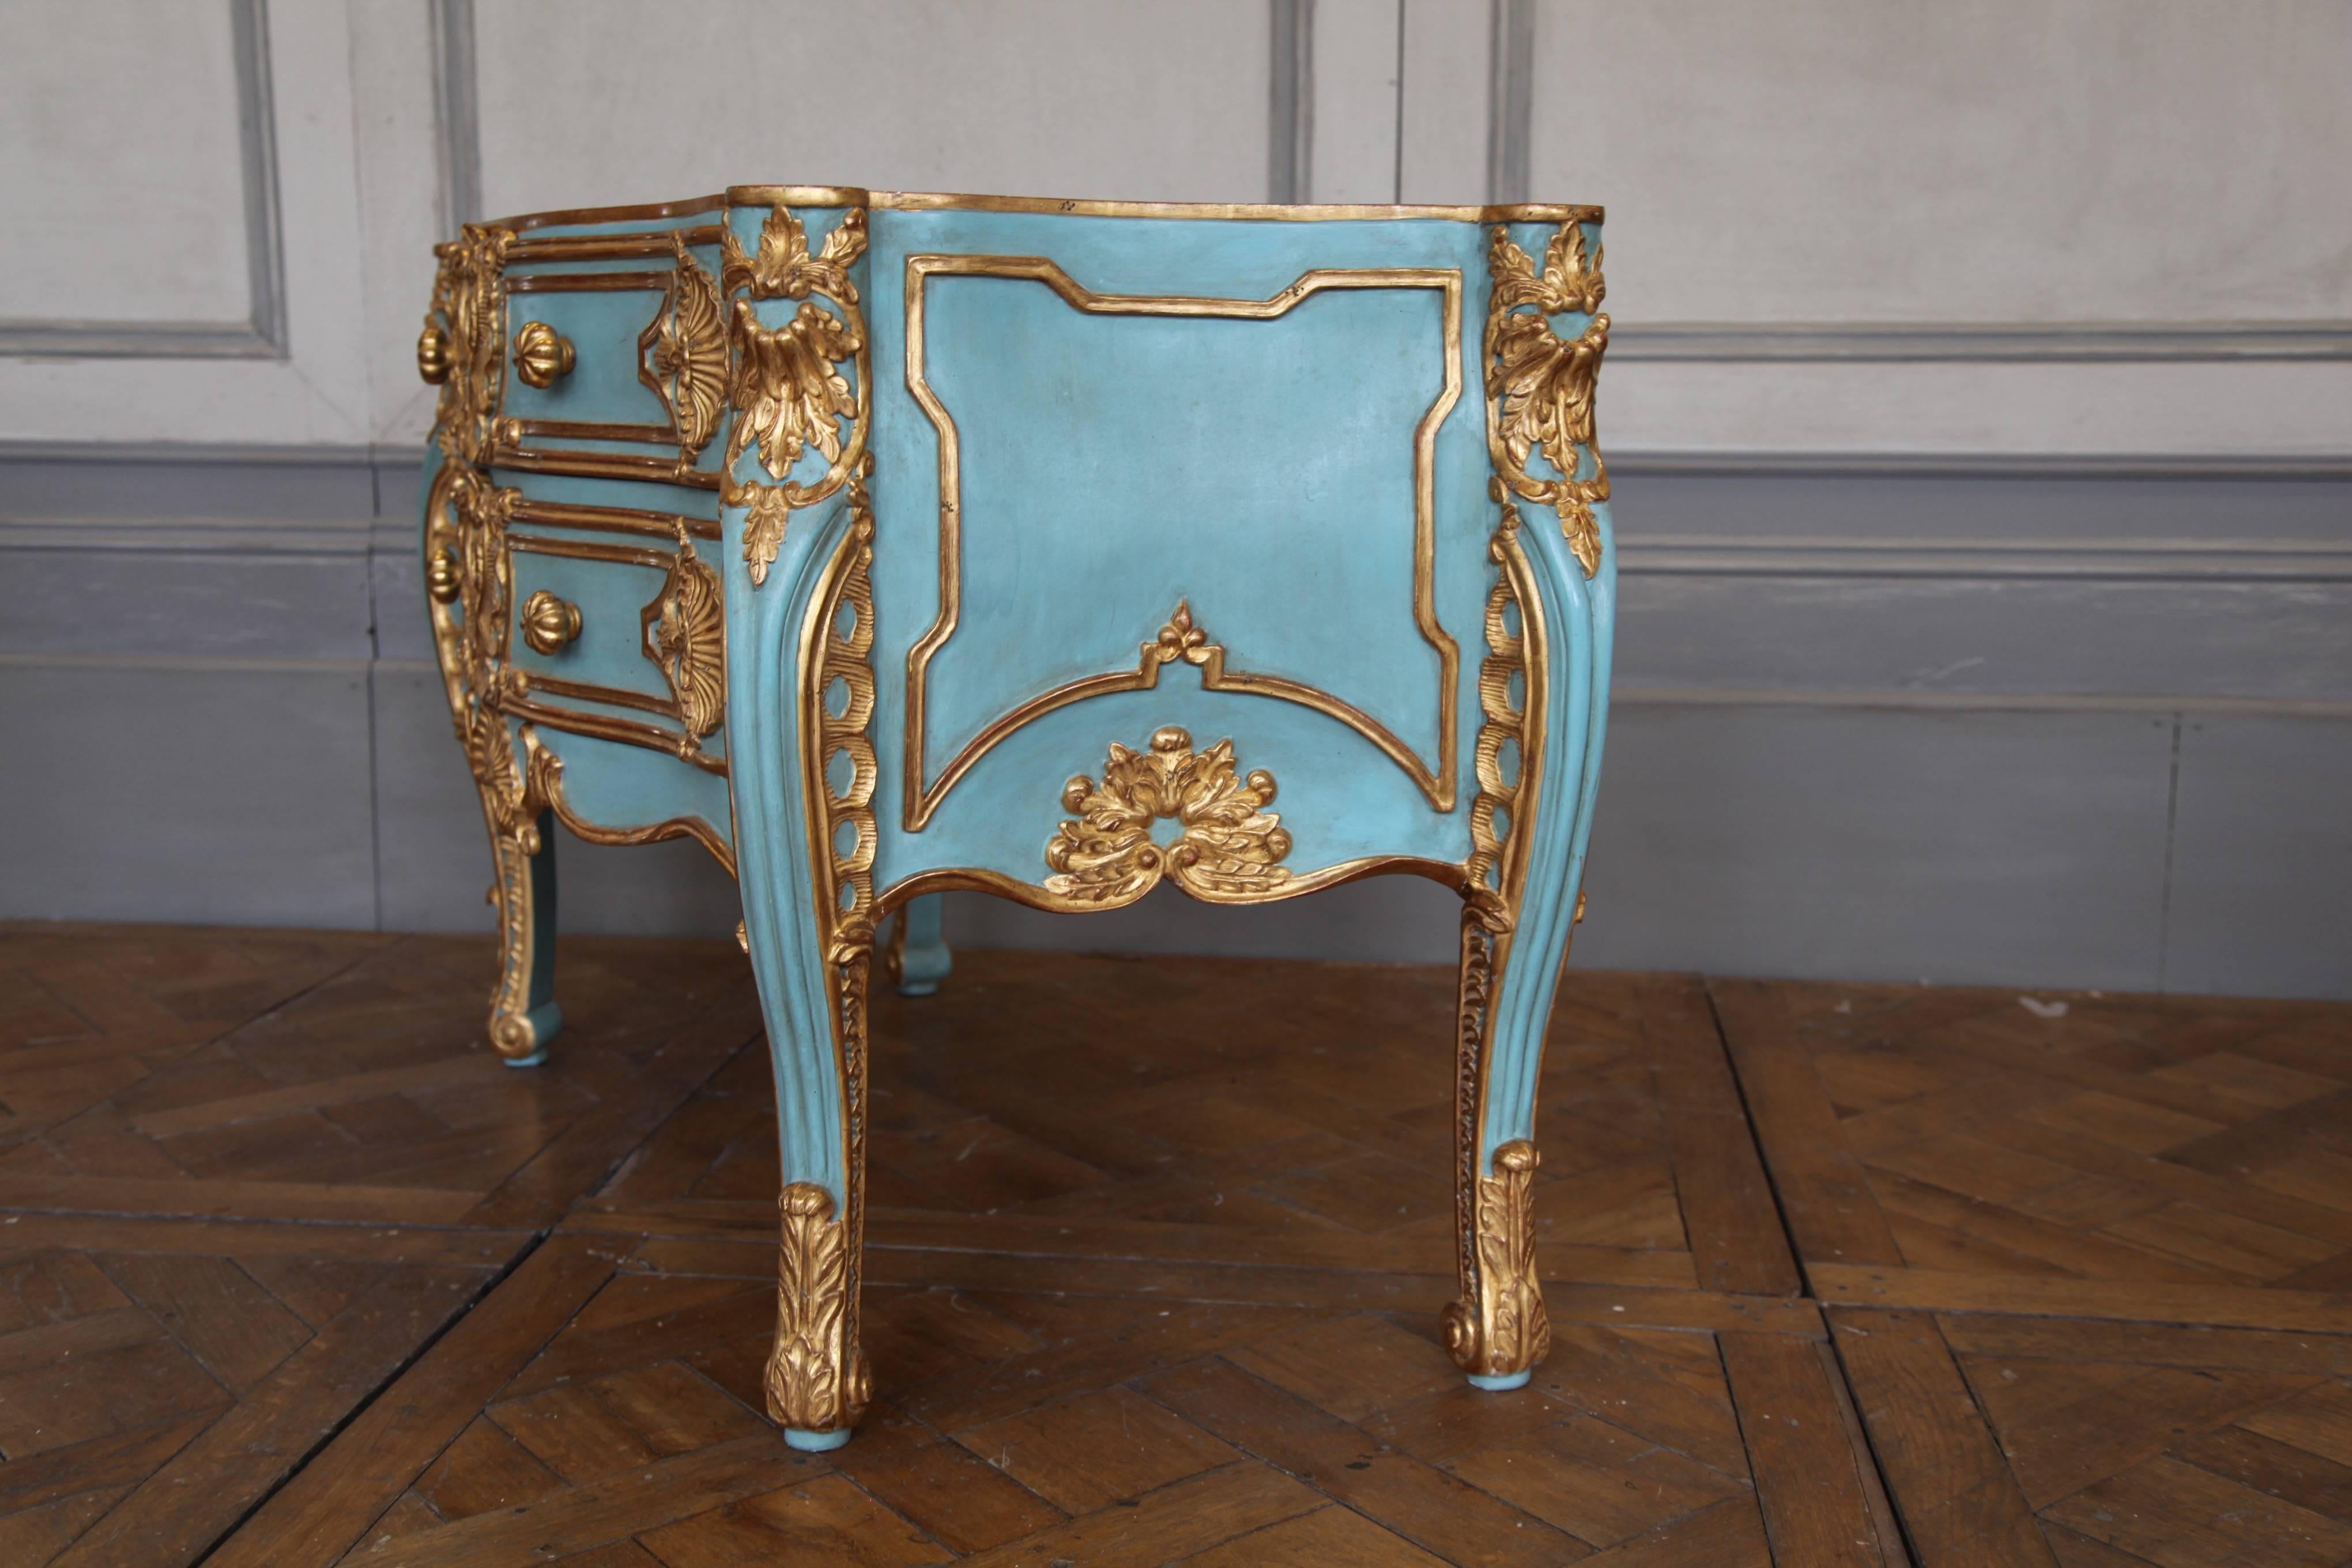 Italian baroque style commode: Hand-carved by master craftsmen and hand finished in an aged polychrome gilded and turquoise patina using traditional methods and materials. A bevelled marble top for this item can be made to order from our selection